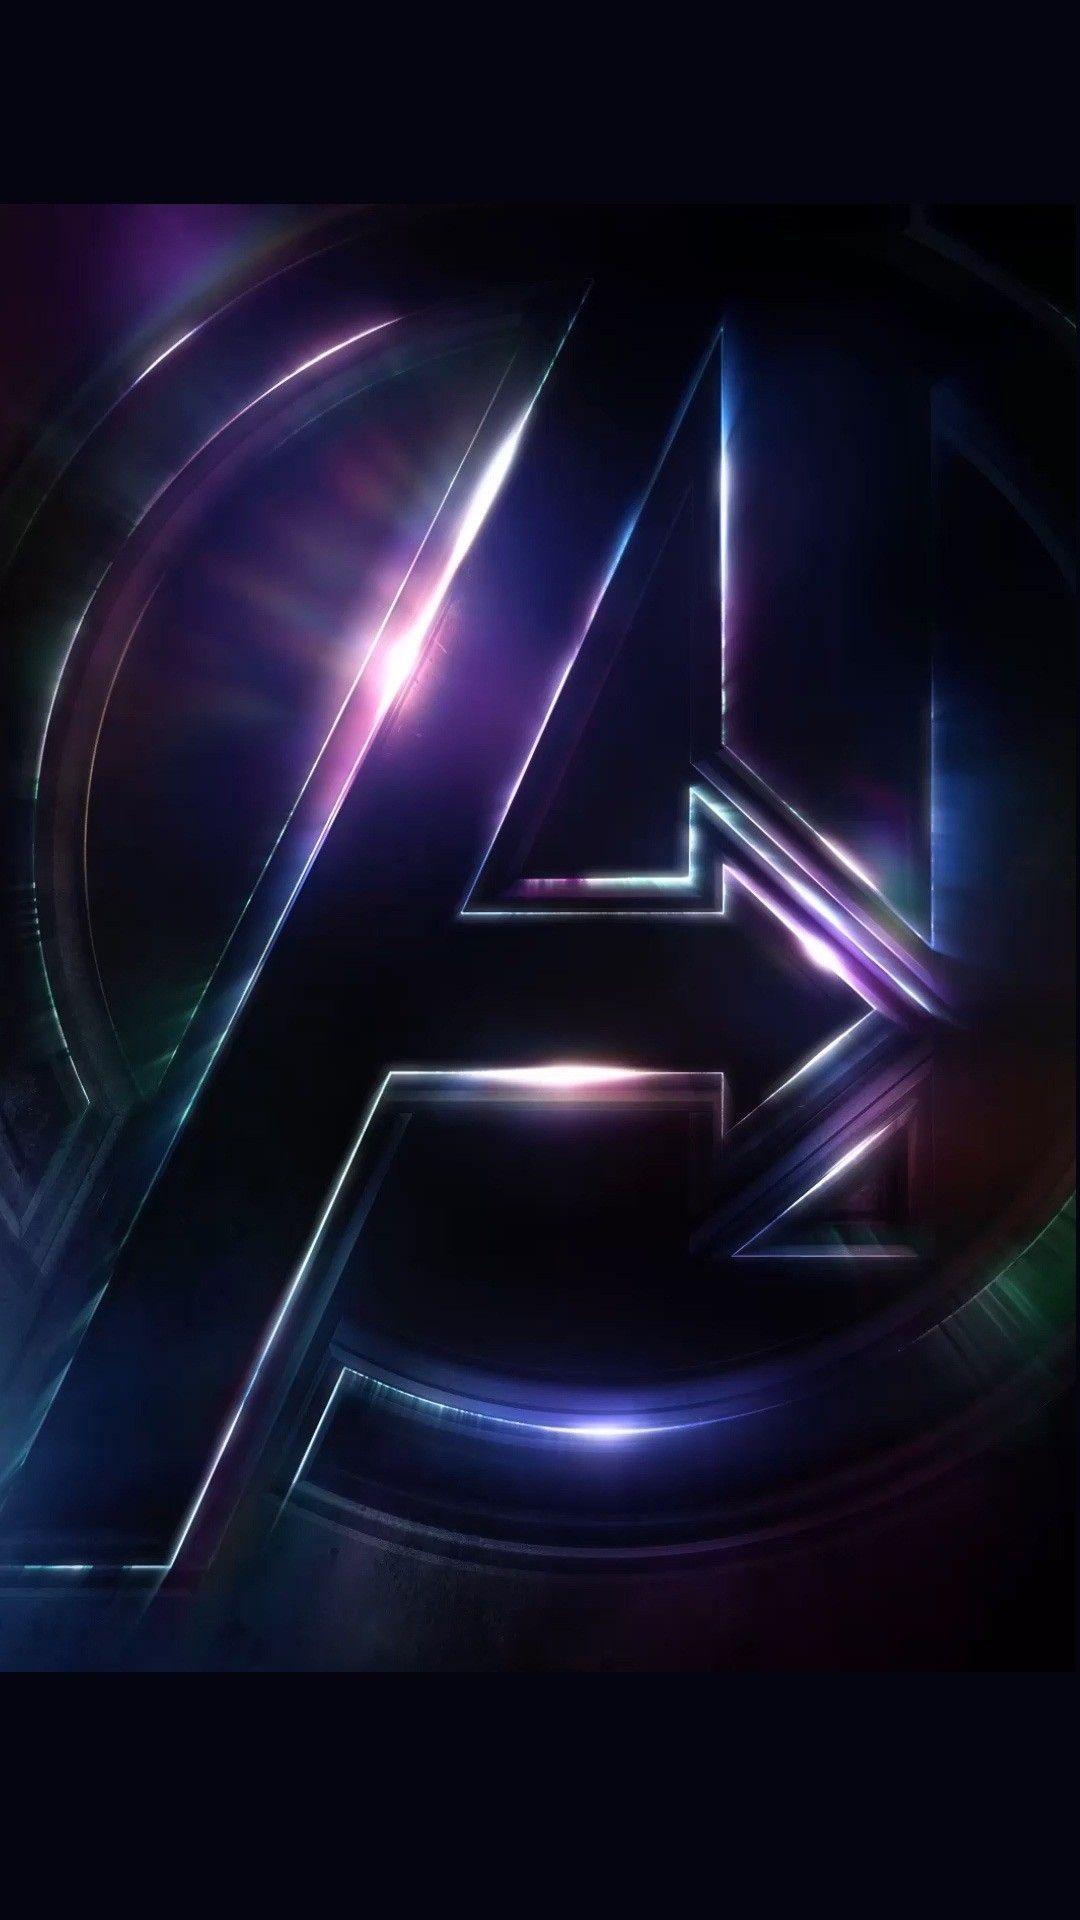 Avengers Infinity War Android Wallpaper Android